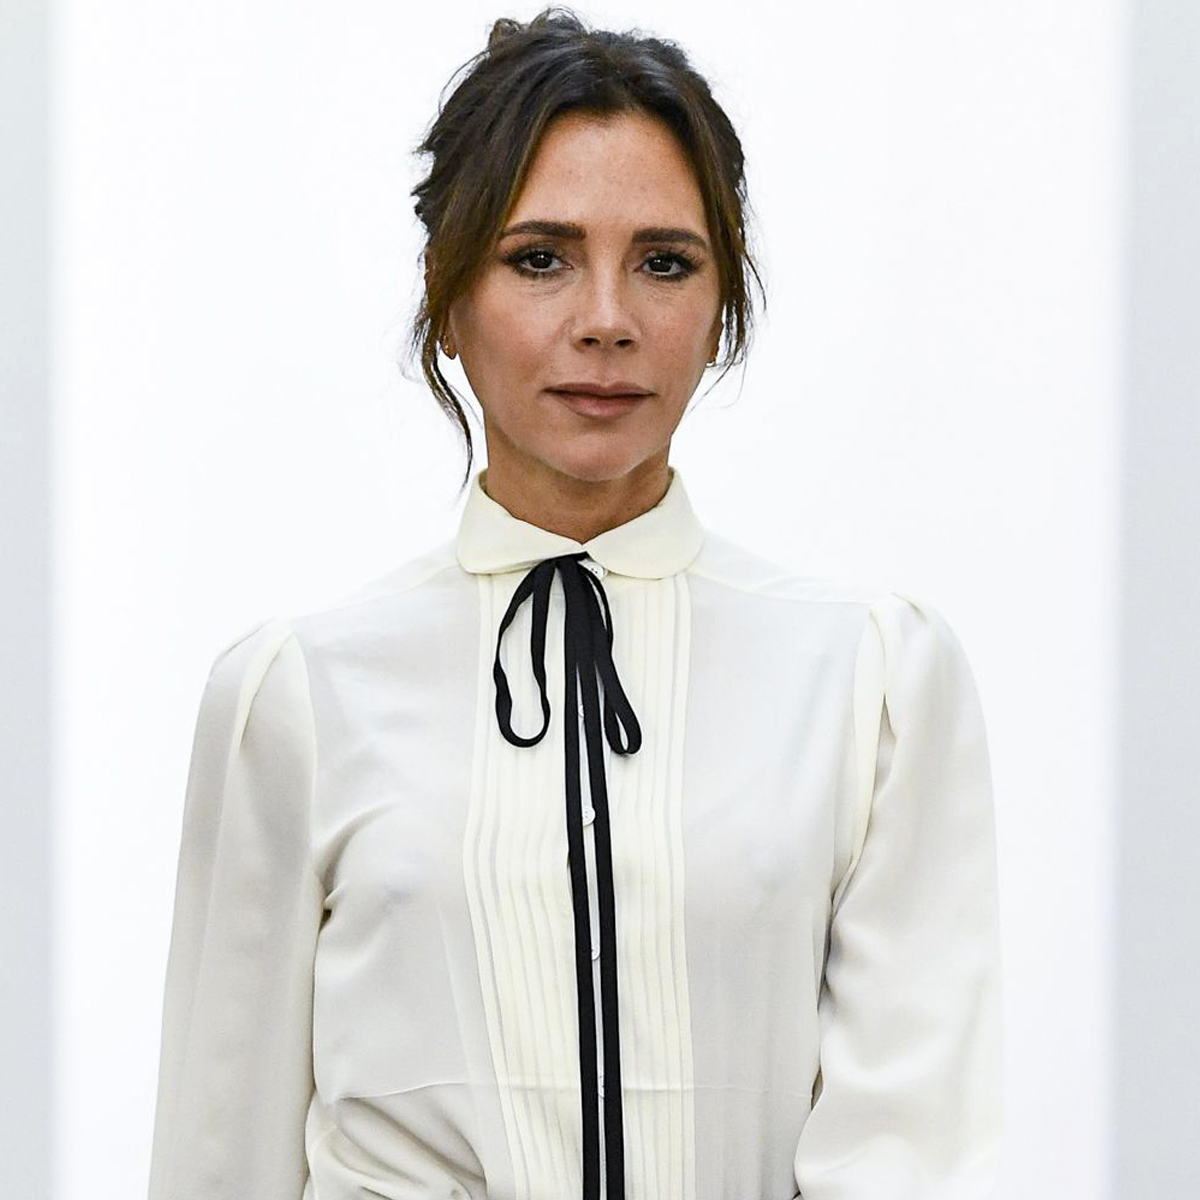 Victoria Beckham remembers the “moment” she had to leave the Spice Girls